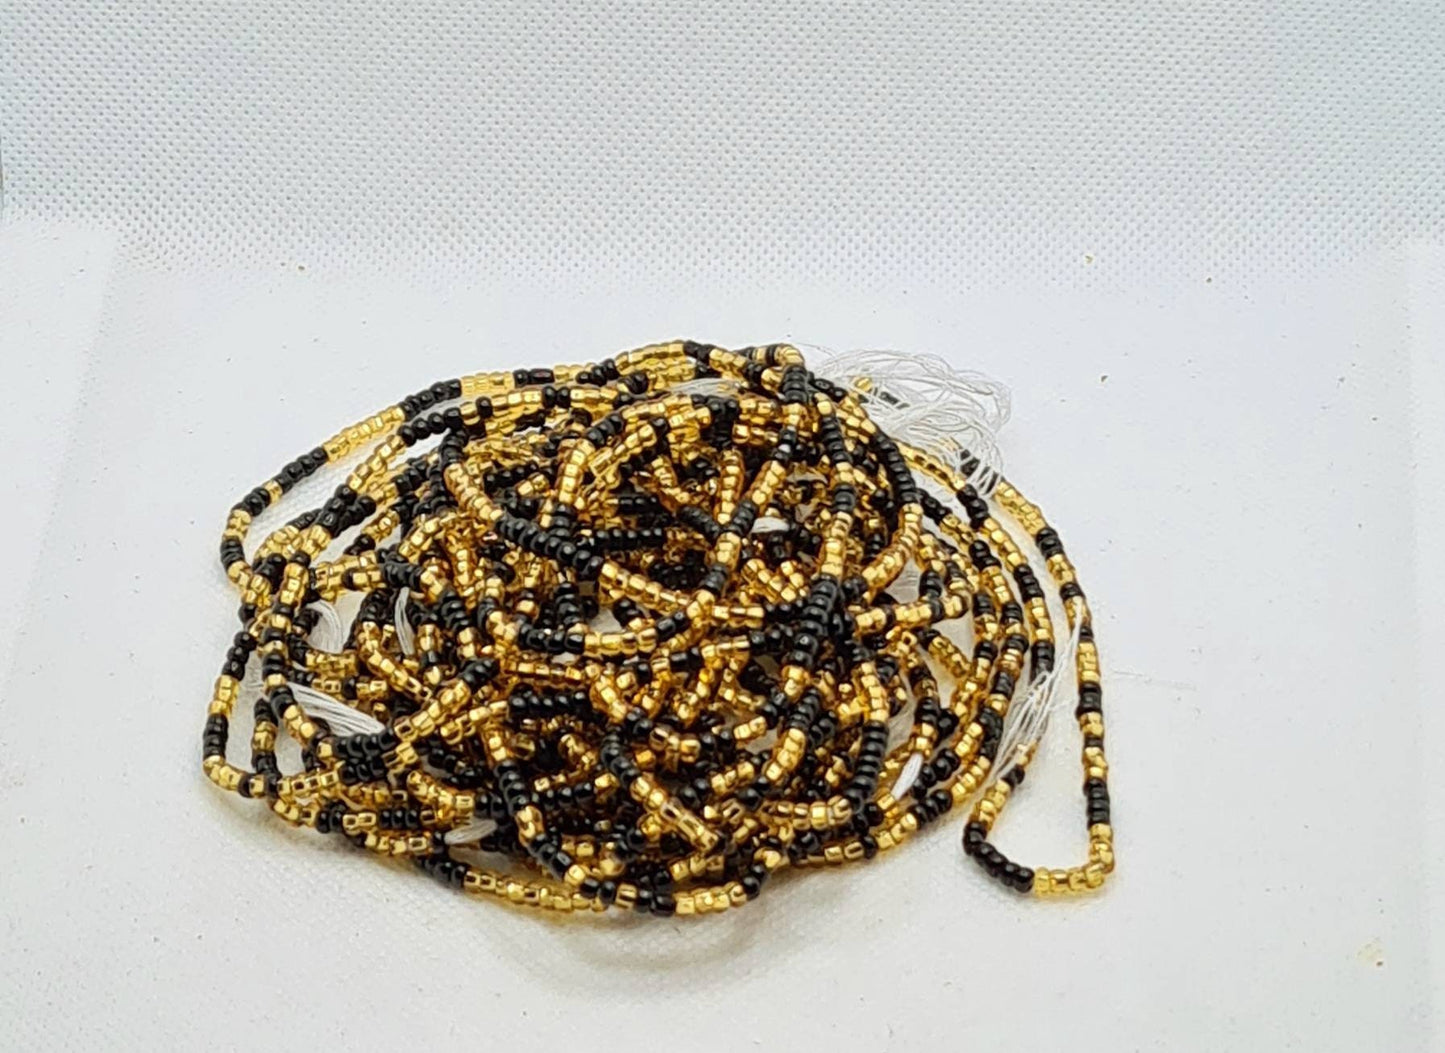 Black and Gold Mix Waist Beads|On Sale Belly Chain Weight control African beads|belly beads| Ghana beads| Weight Tracker Beads|